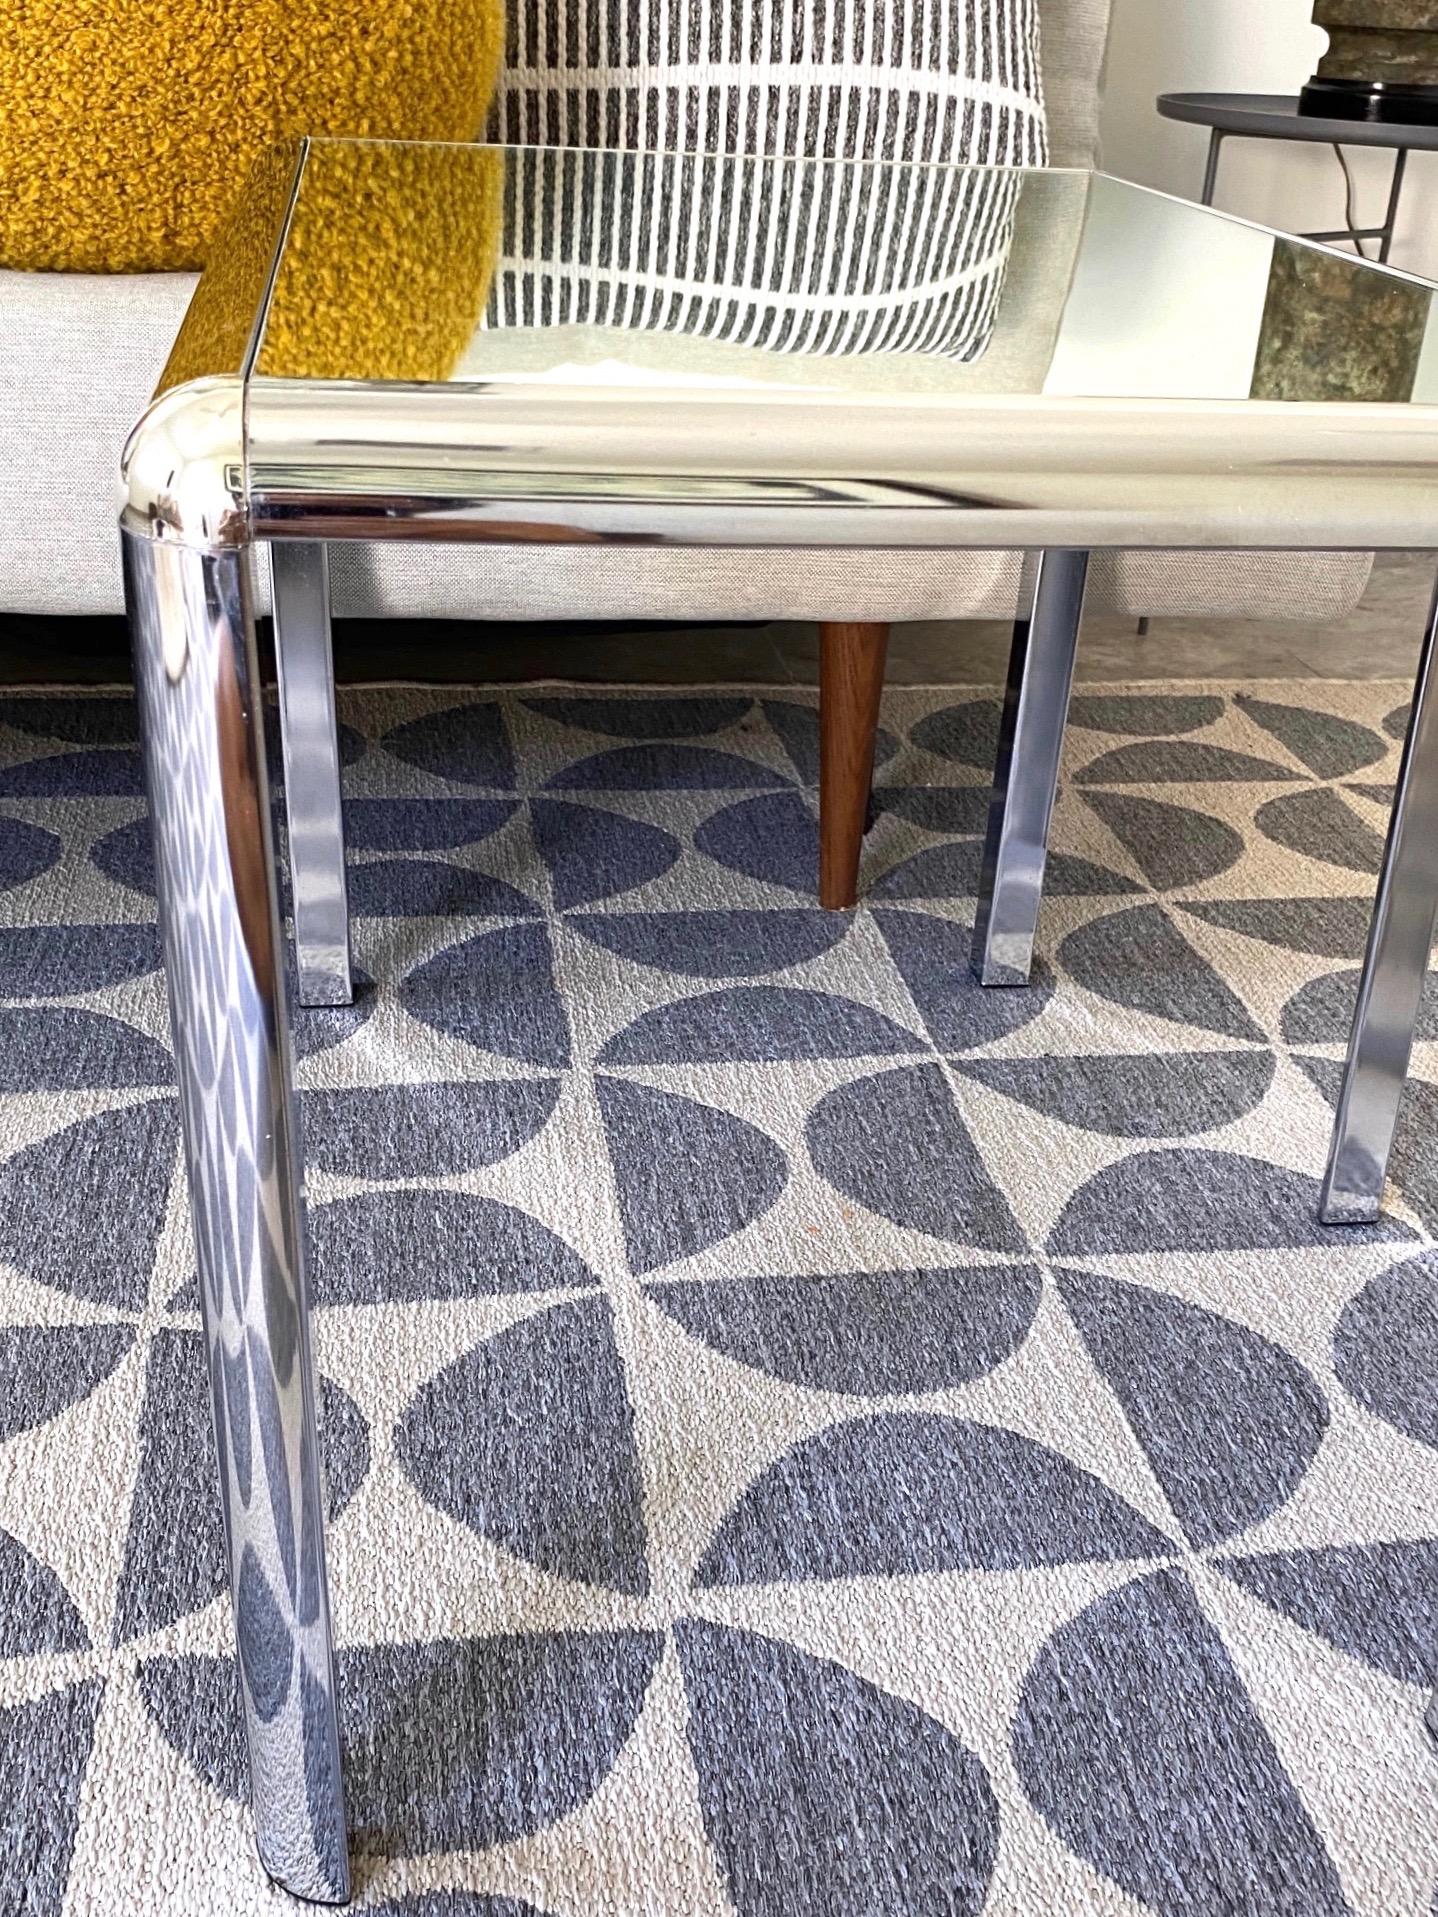 Pair of Mid-Century Modern Chrome Side Tables with Mirrored Tops, c. 1970's For Sale 5